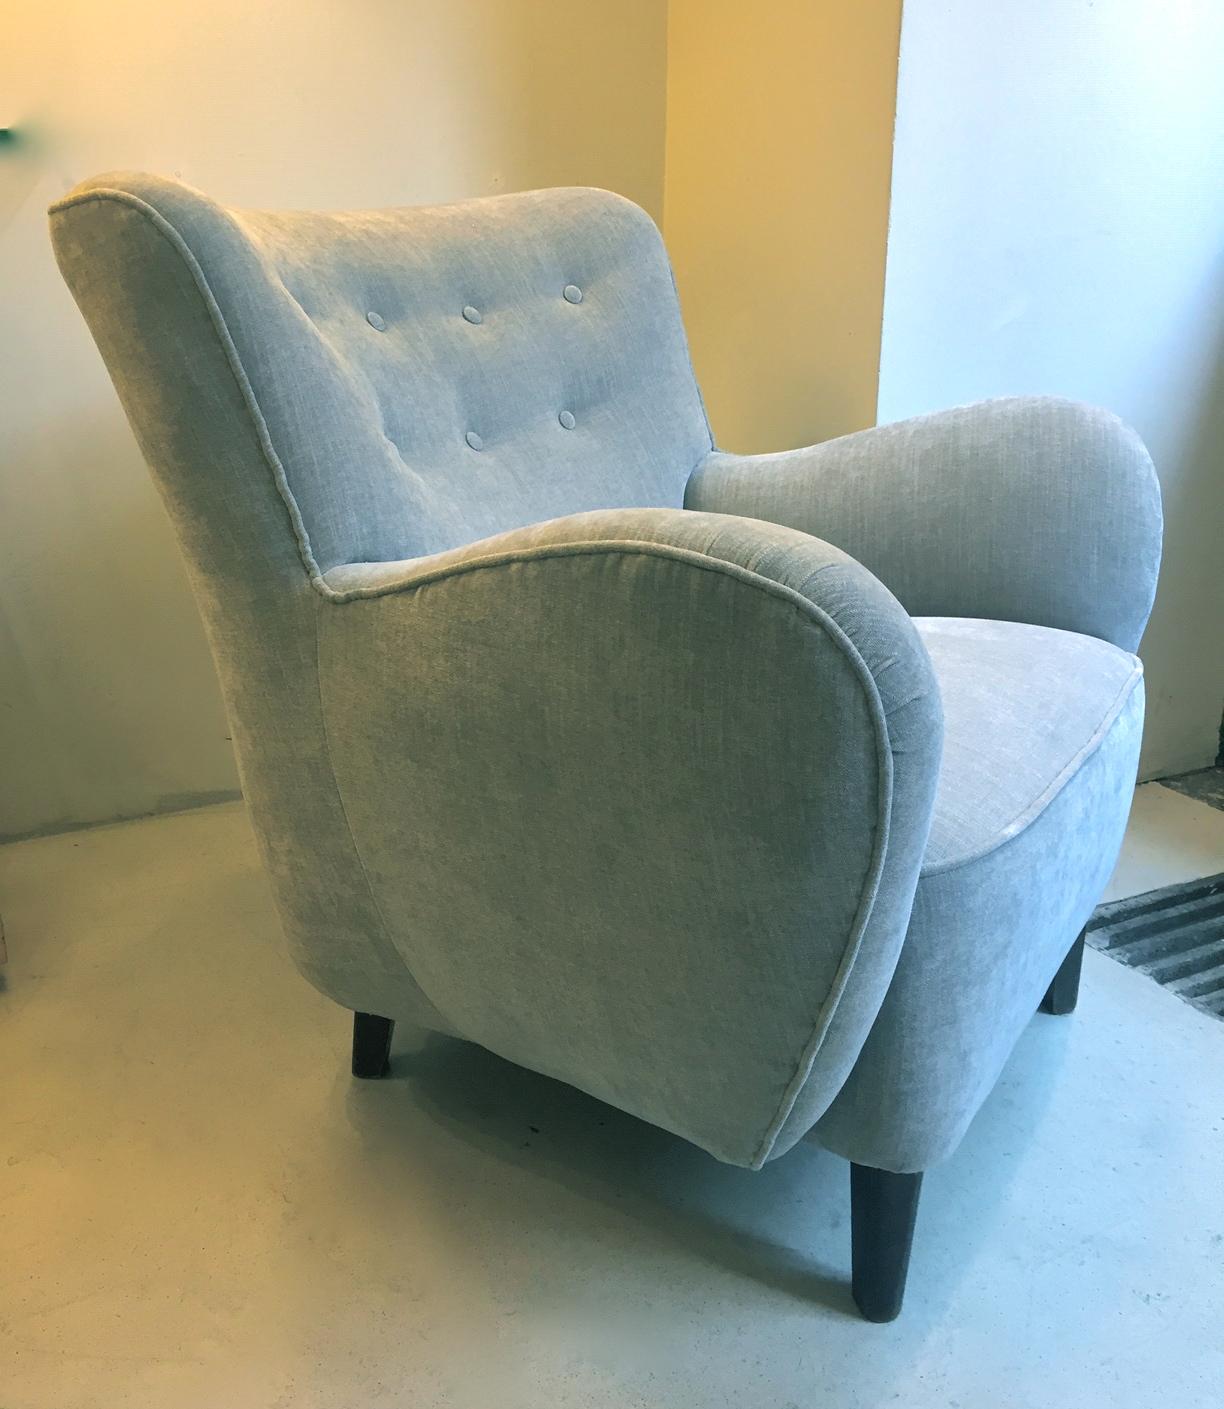 An Scandinavian Modern armchair edited in the 1940s and reupholstered in grey 